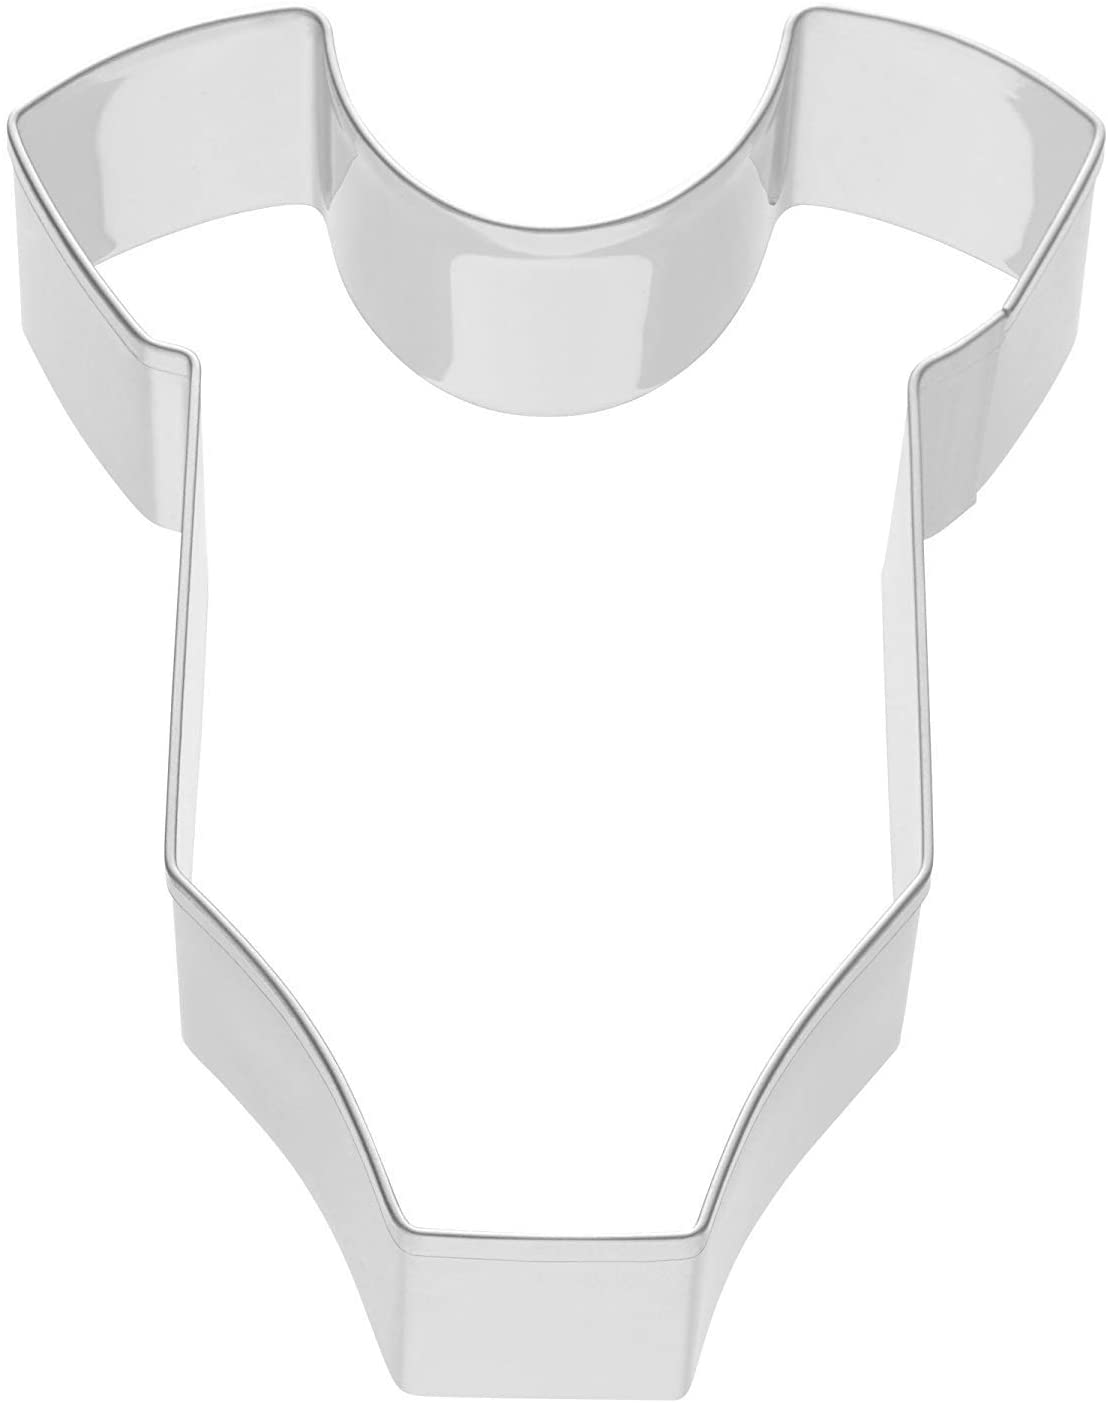 Kaiser Biscuit Cutter Romper, Baby, Stainless Steel, Cookie Cutter for Biscuits, 7 x 6 x 2.5 cm